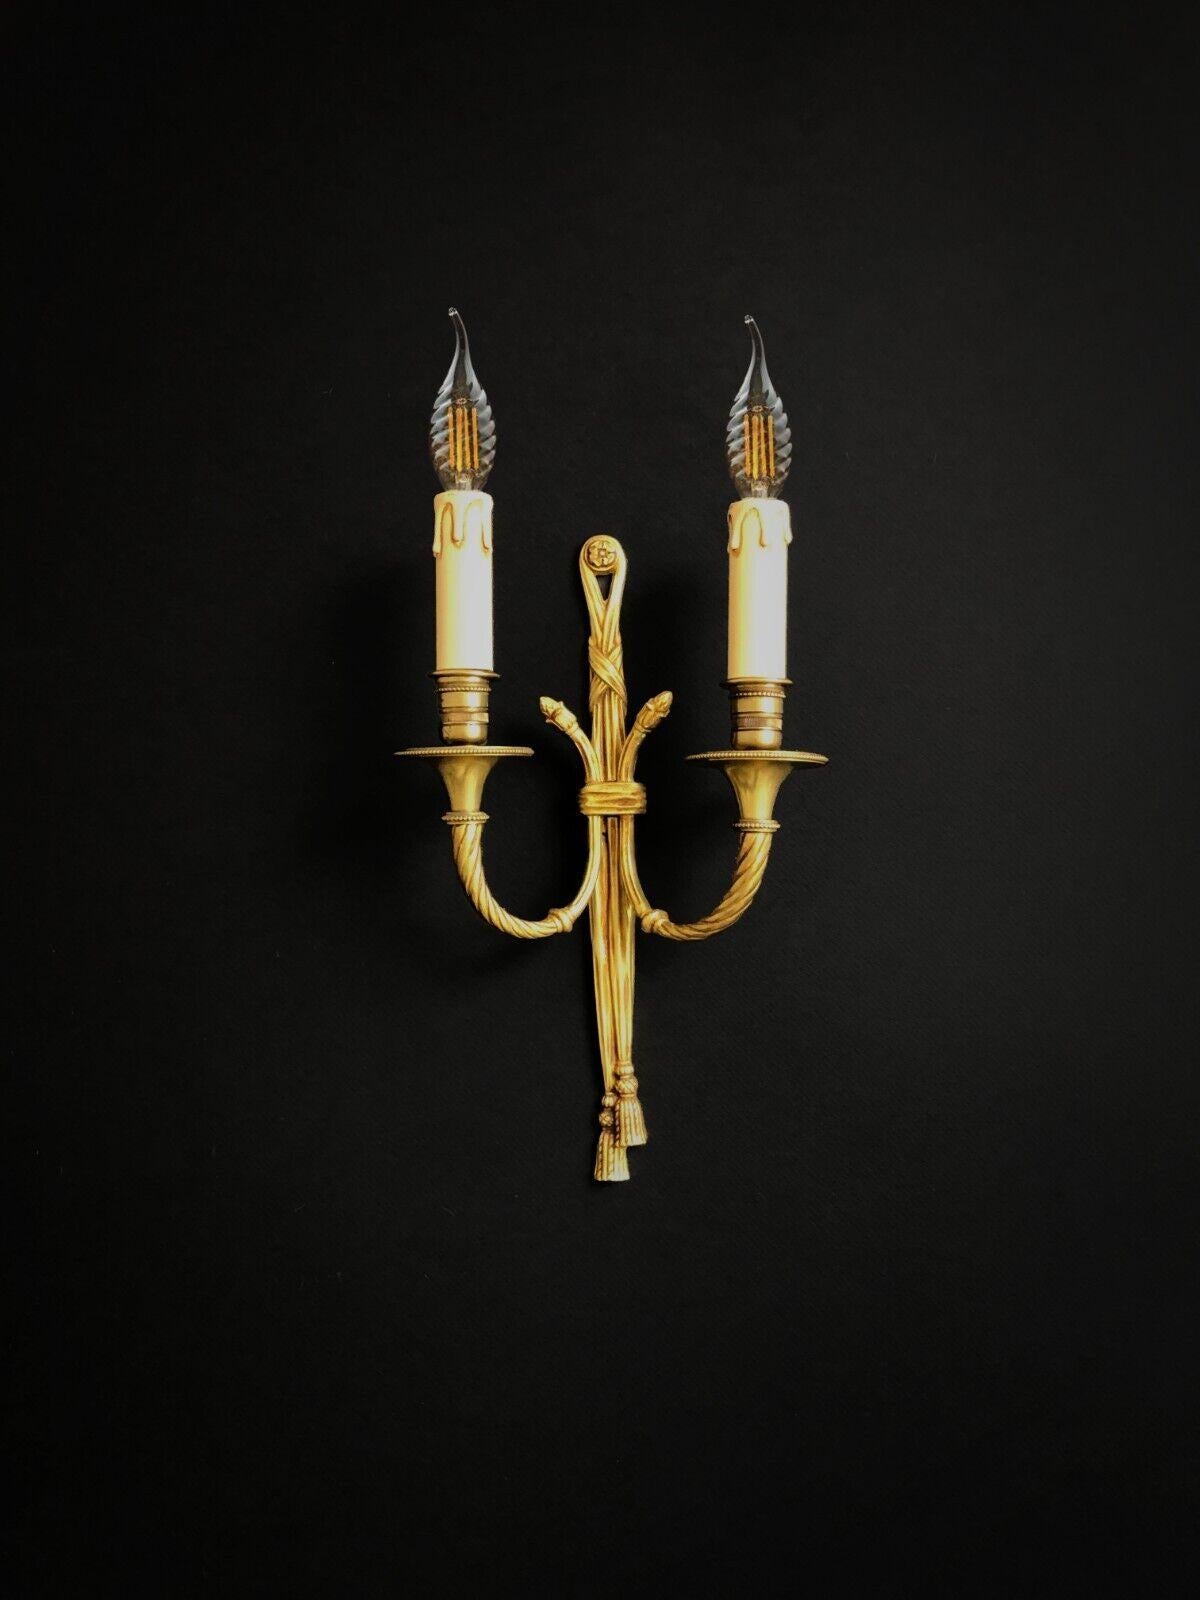 An elegant and luxurious wall light with 2 arms of light, Art-Deco, Neo-Classical, Shabby-Chic, classic 2-arm body with very refined bronze drapery and trimmings decorations, Maison Baguès, France 1960-1970.

DIMENSIONS: H 30 x L 23.5 x D 10